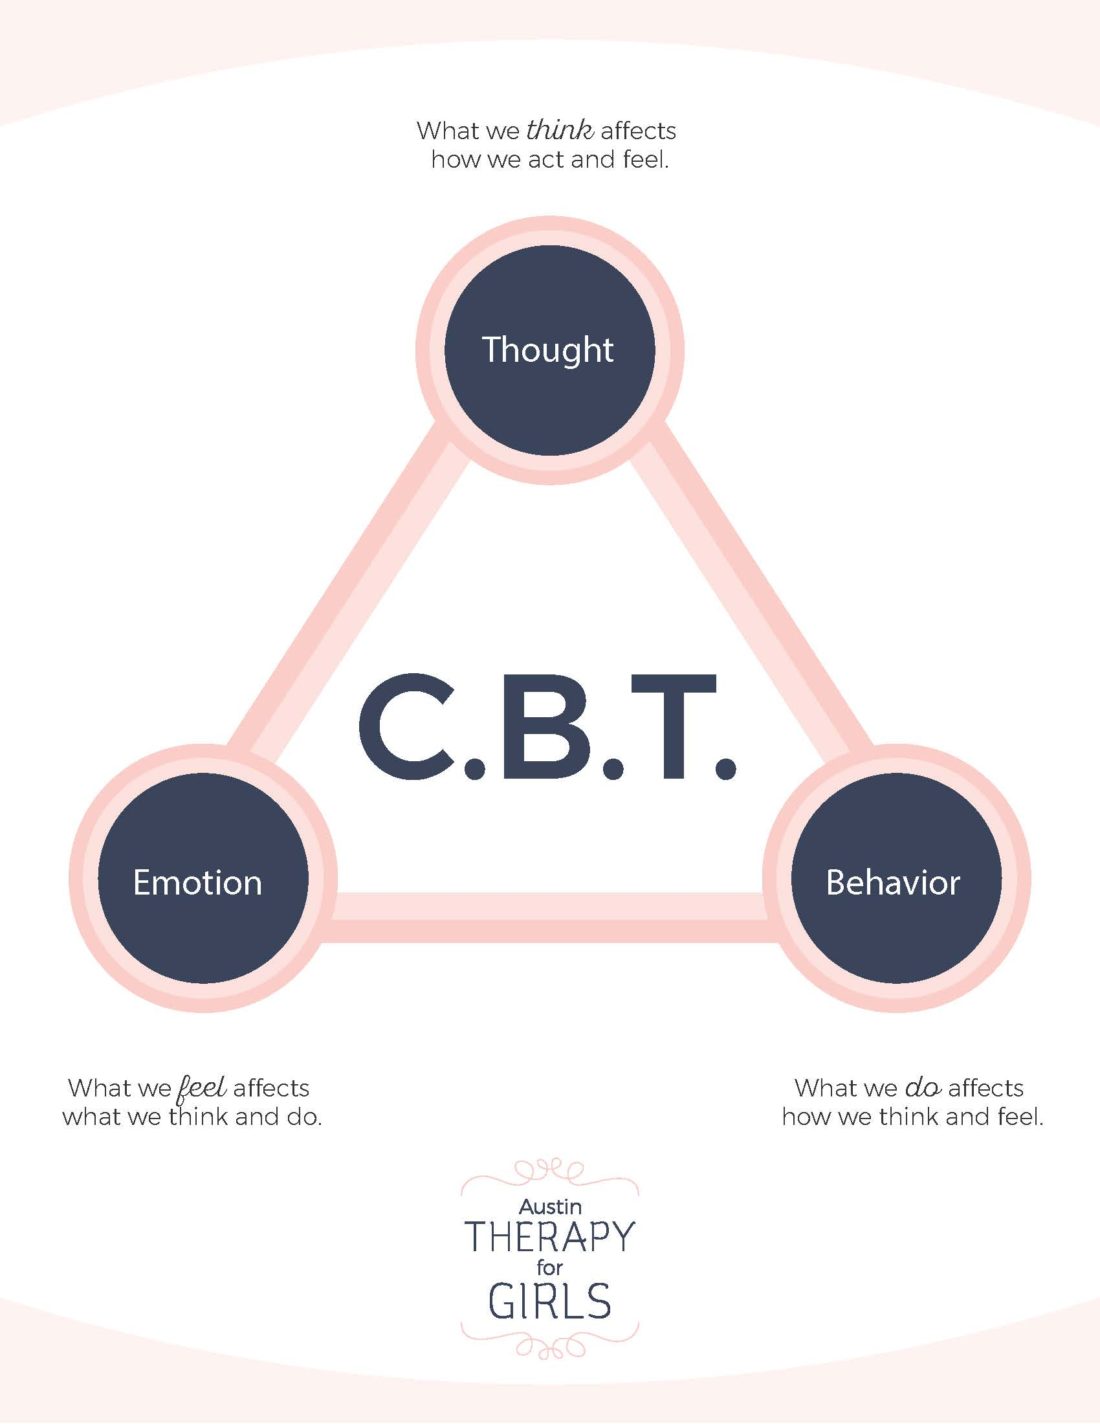 Manage Anxiety and Depression through CBT